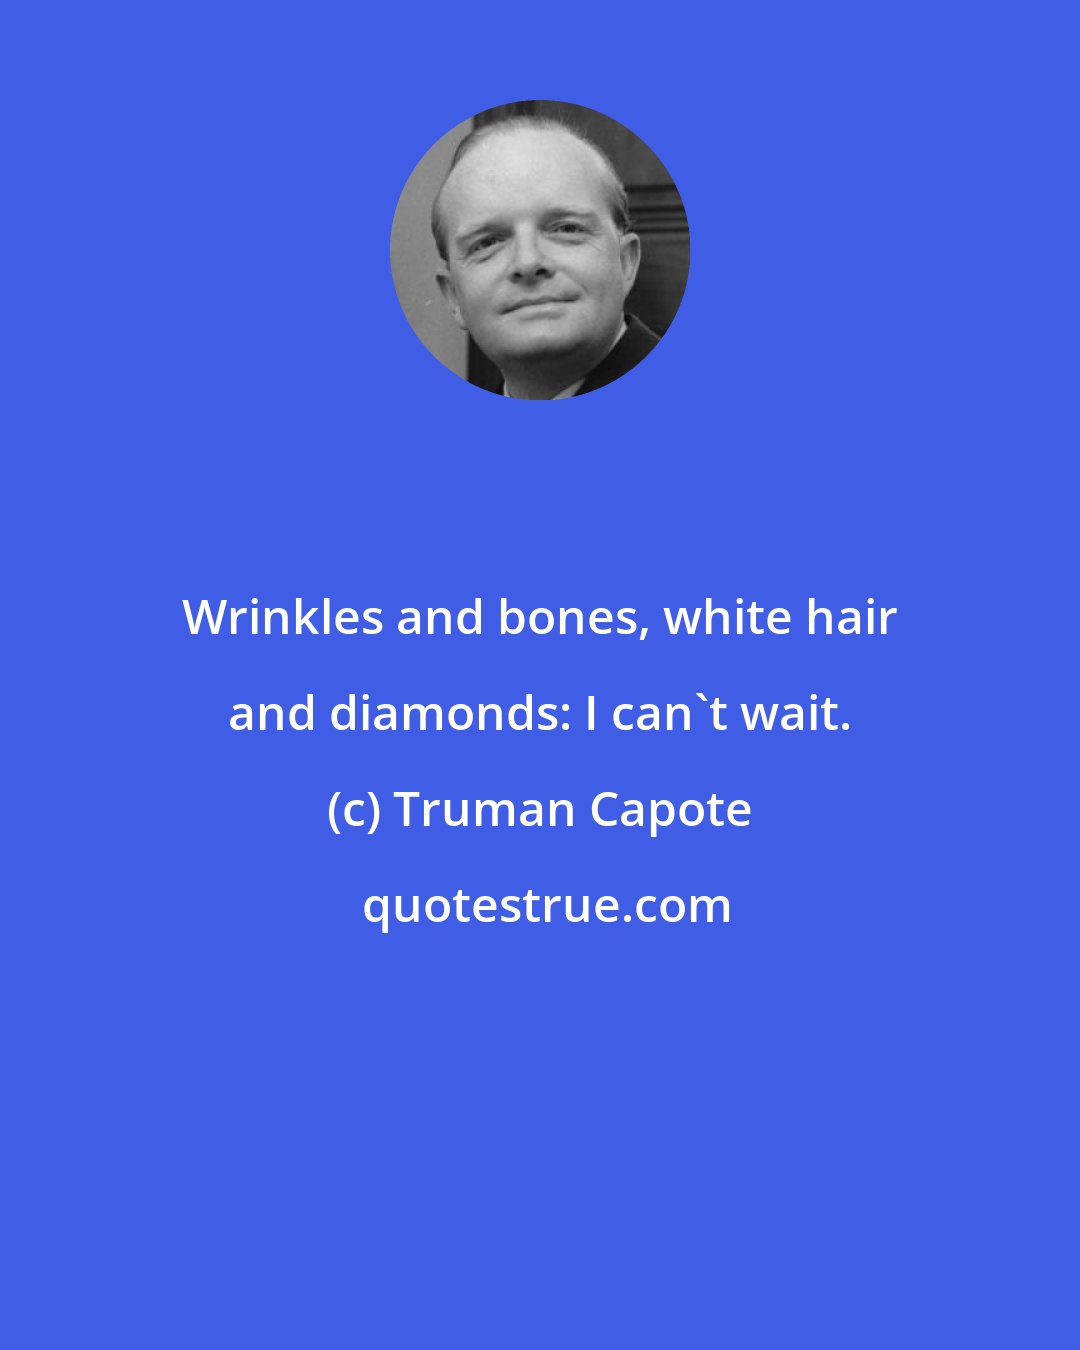 Truman Capote: Wrinkles and bones, white hair and diamonds: I can't wait.